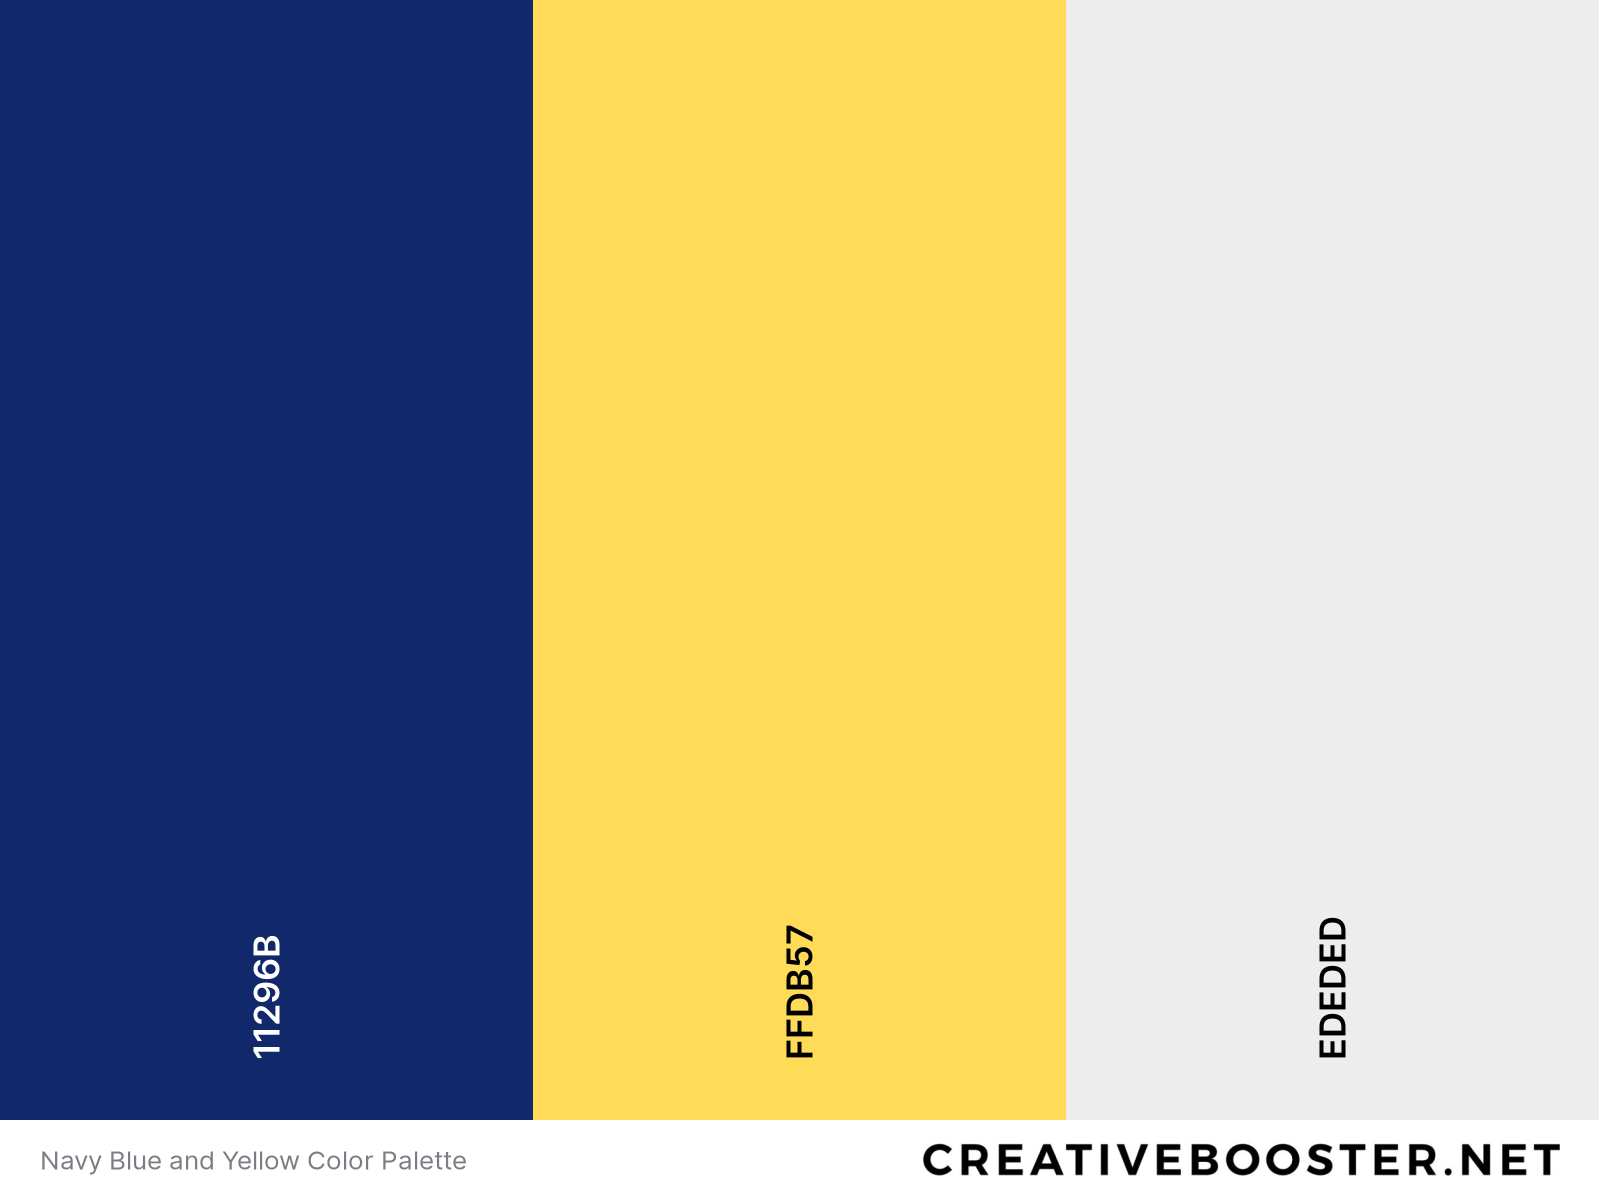 Navy Blue and Yellow Color Palette